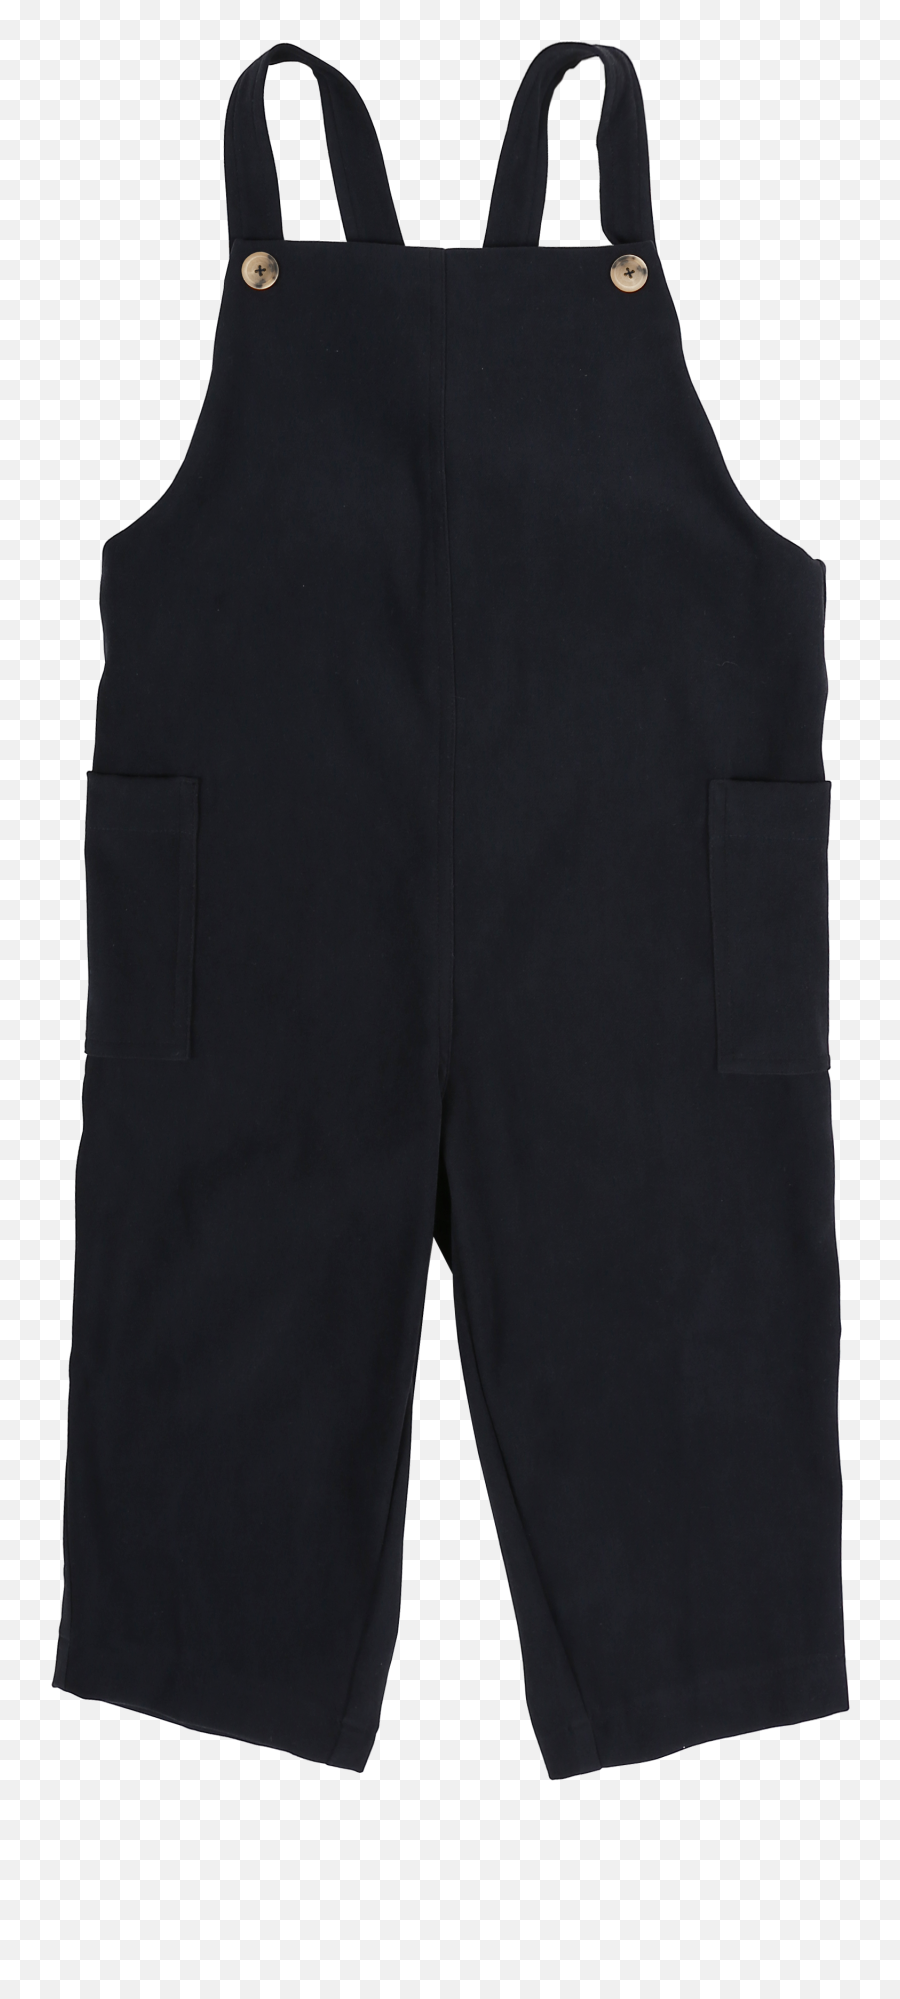 Black Suede Unisex Overalls - Overalls Png,Overalls Png